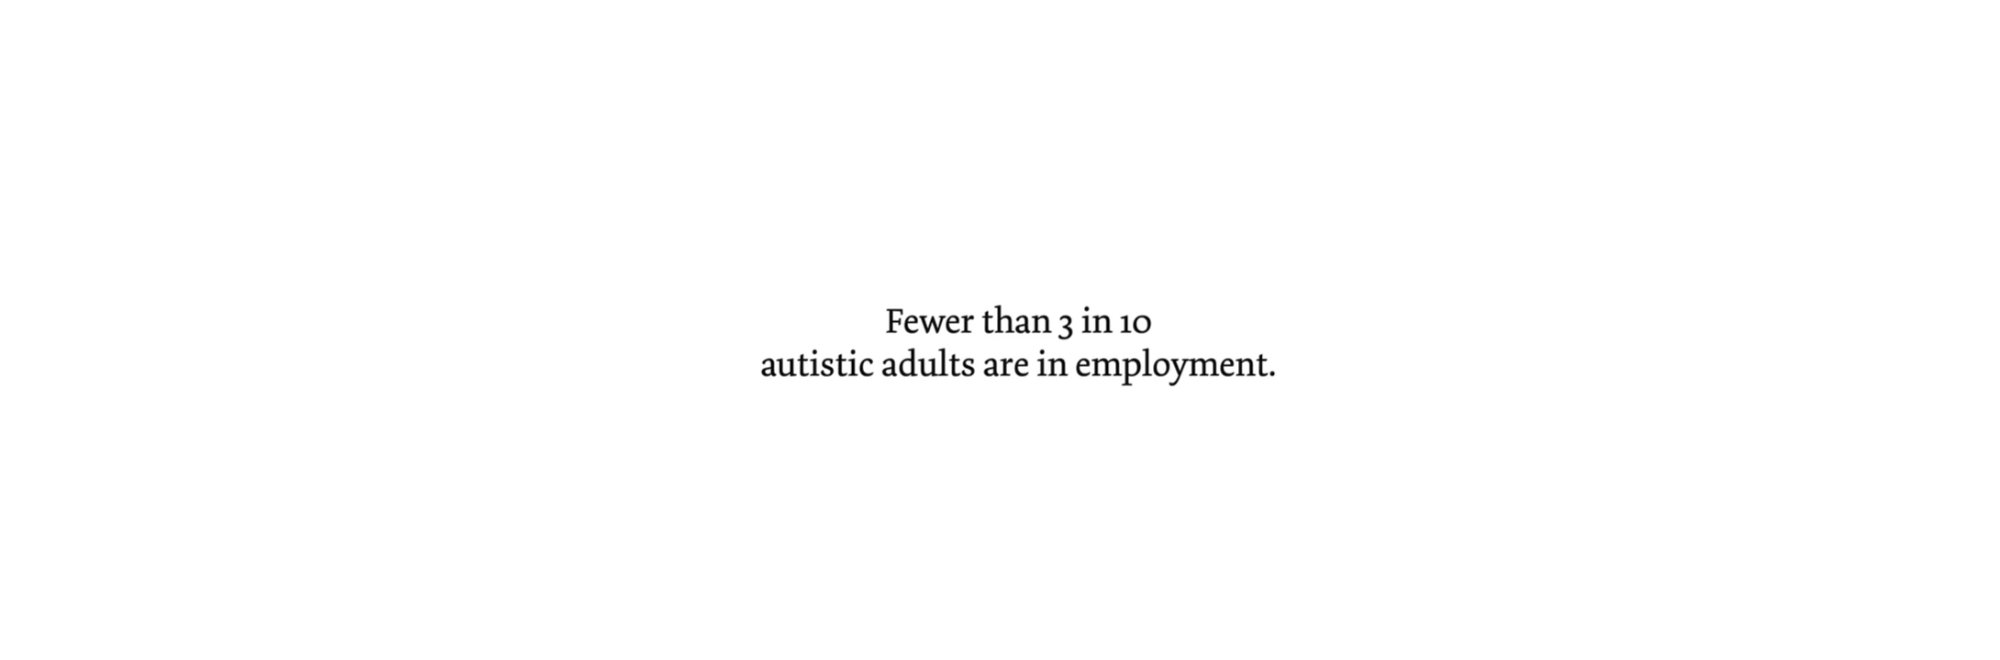 House 337 and Autistica spotlight the challenge of a job interview for people with autism